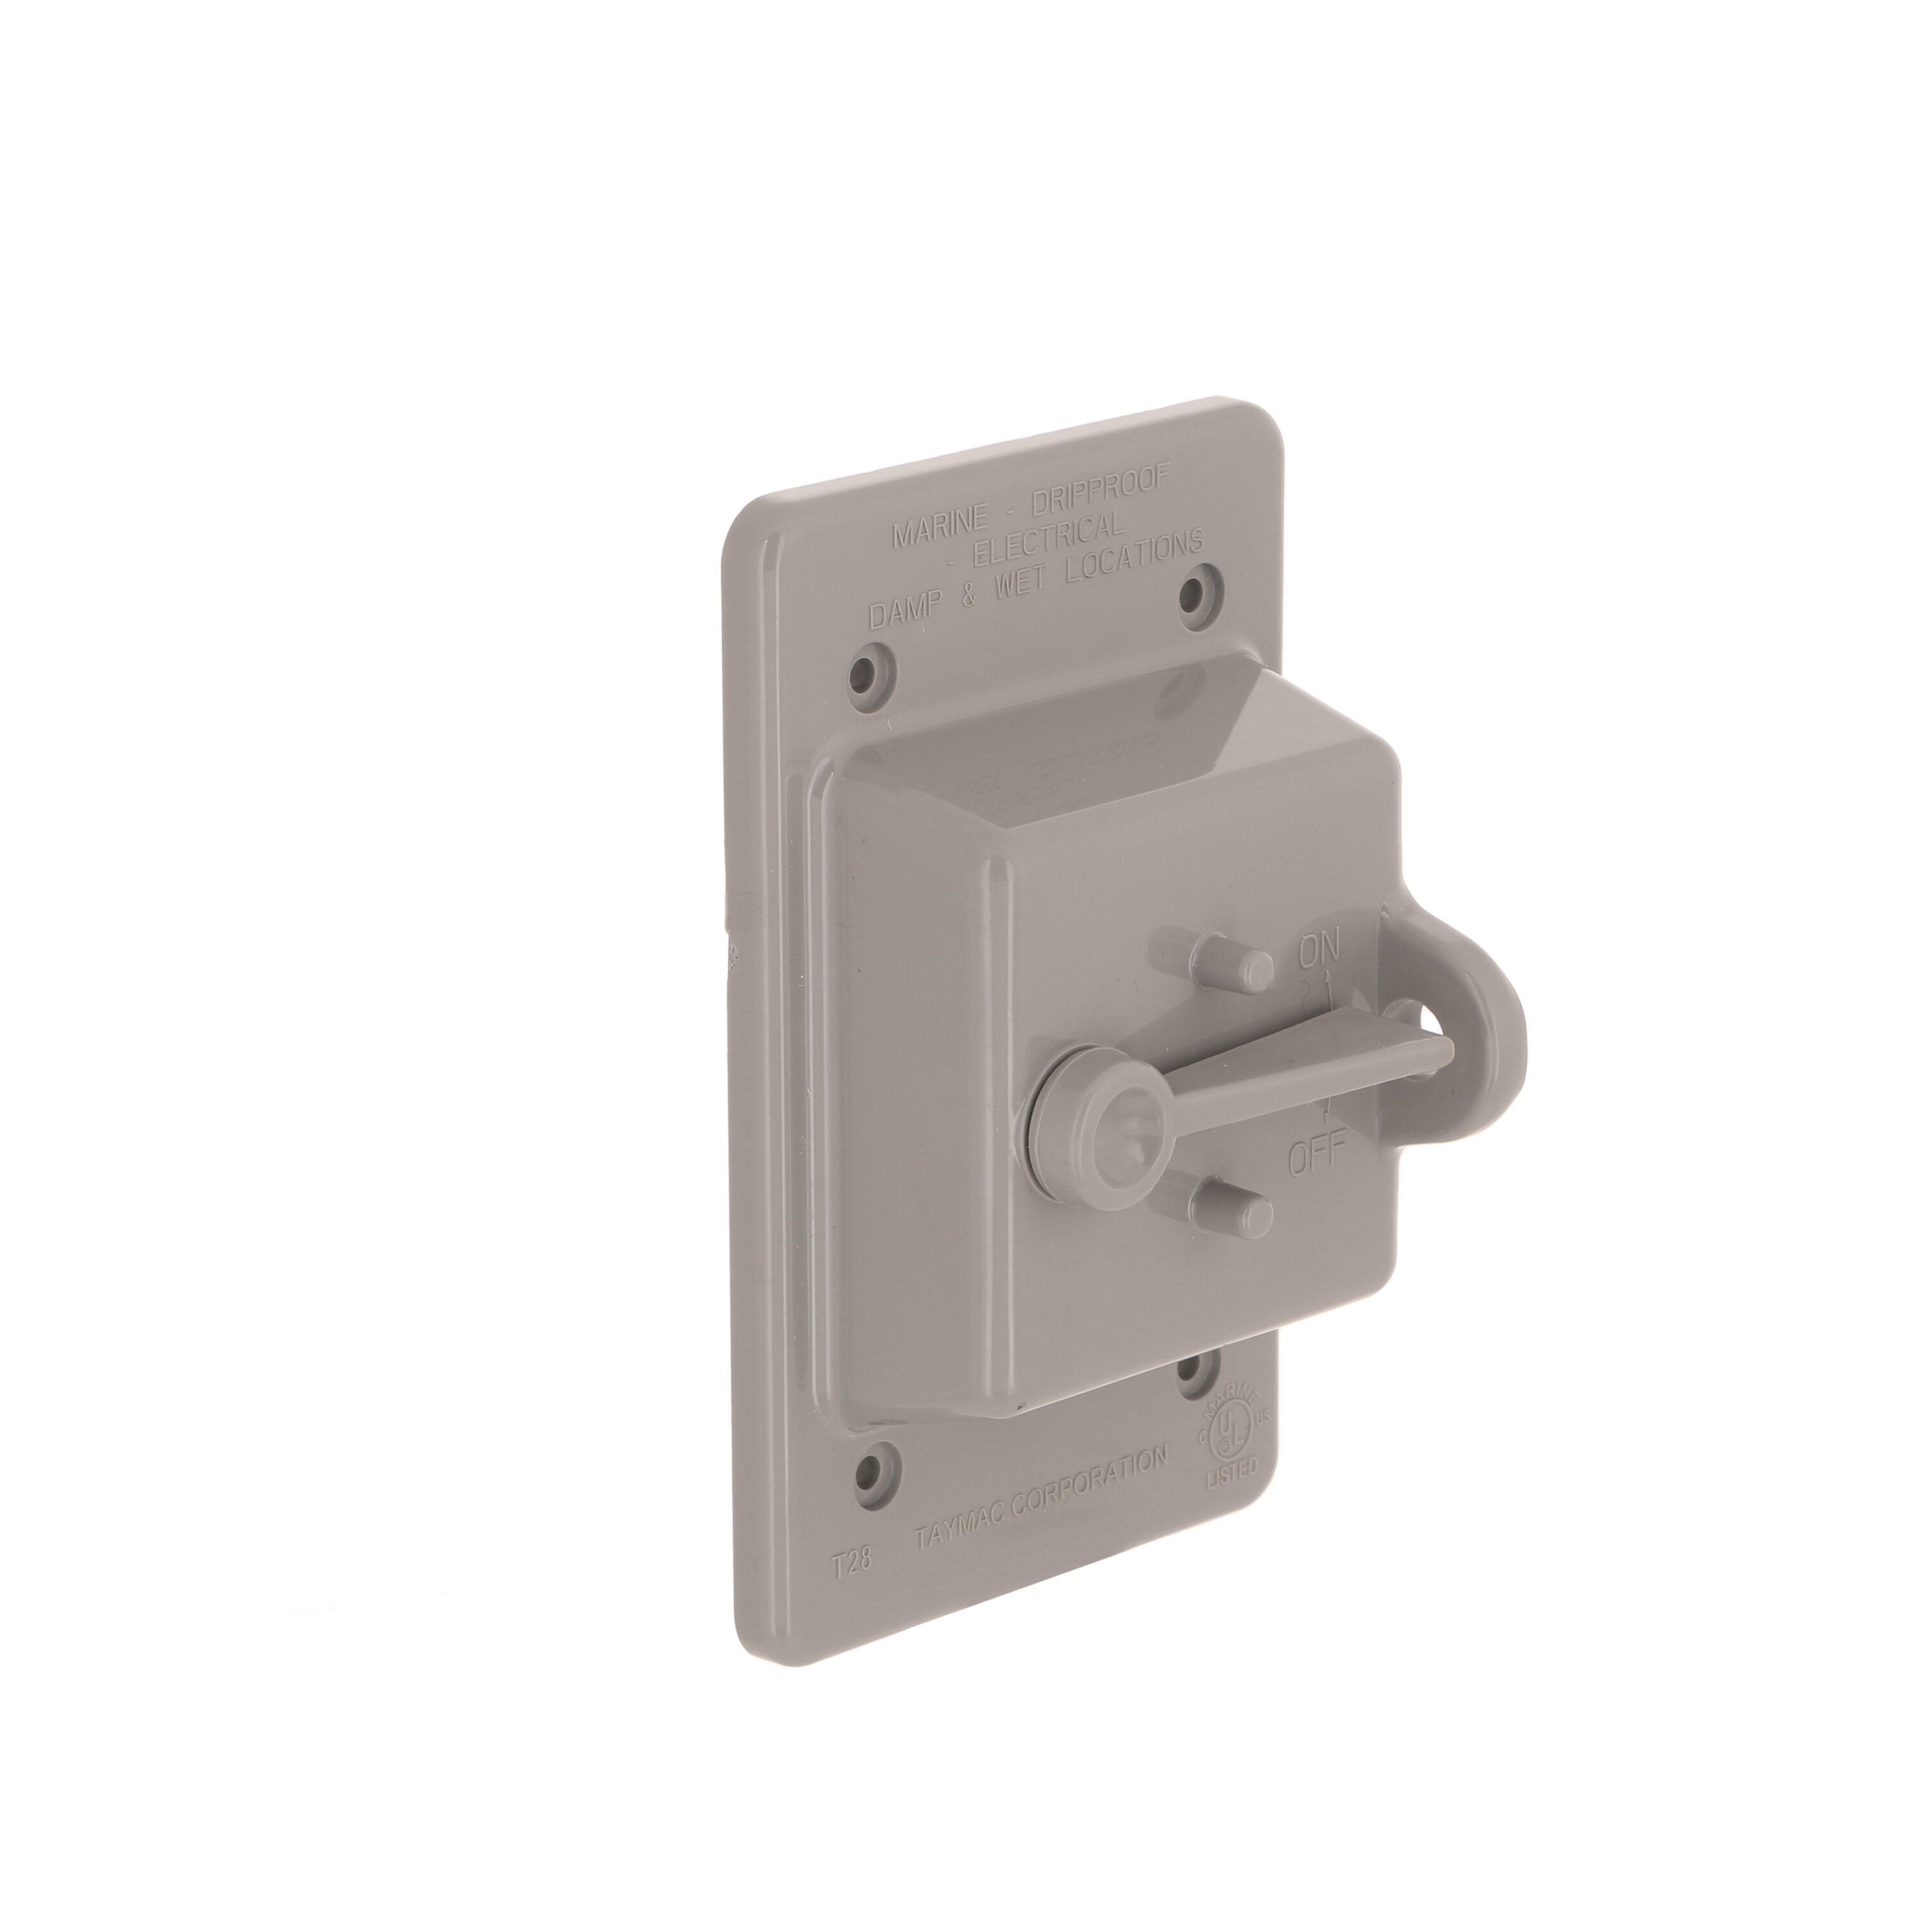  Bell MX1250S Weatherproof Single Outlet Cover Outdoor